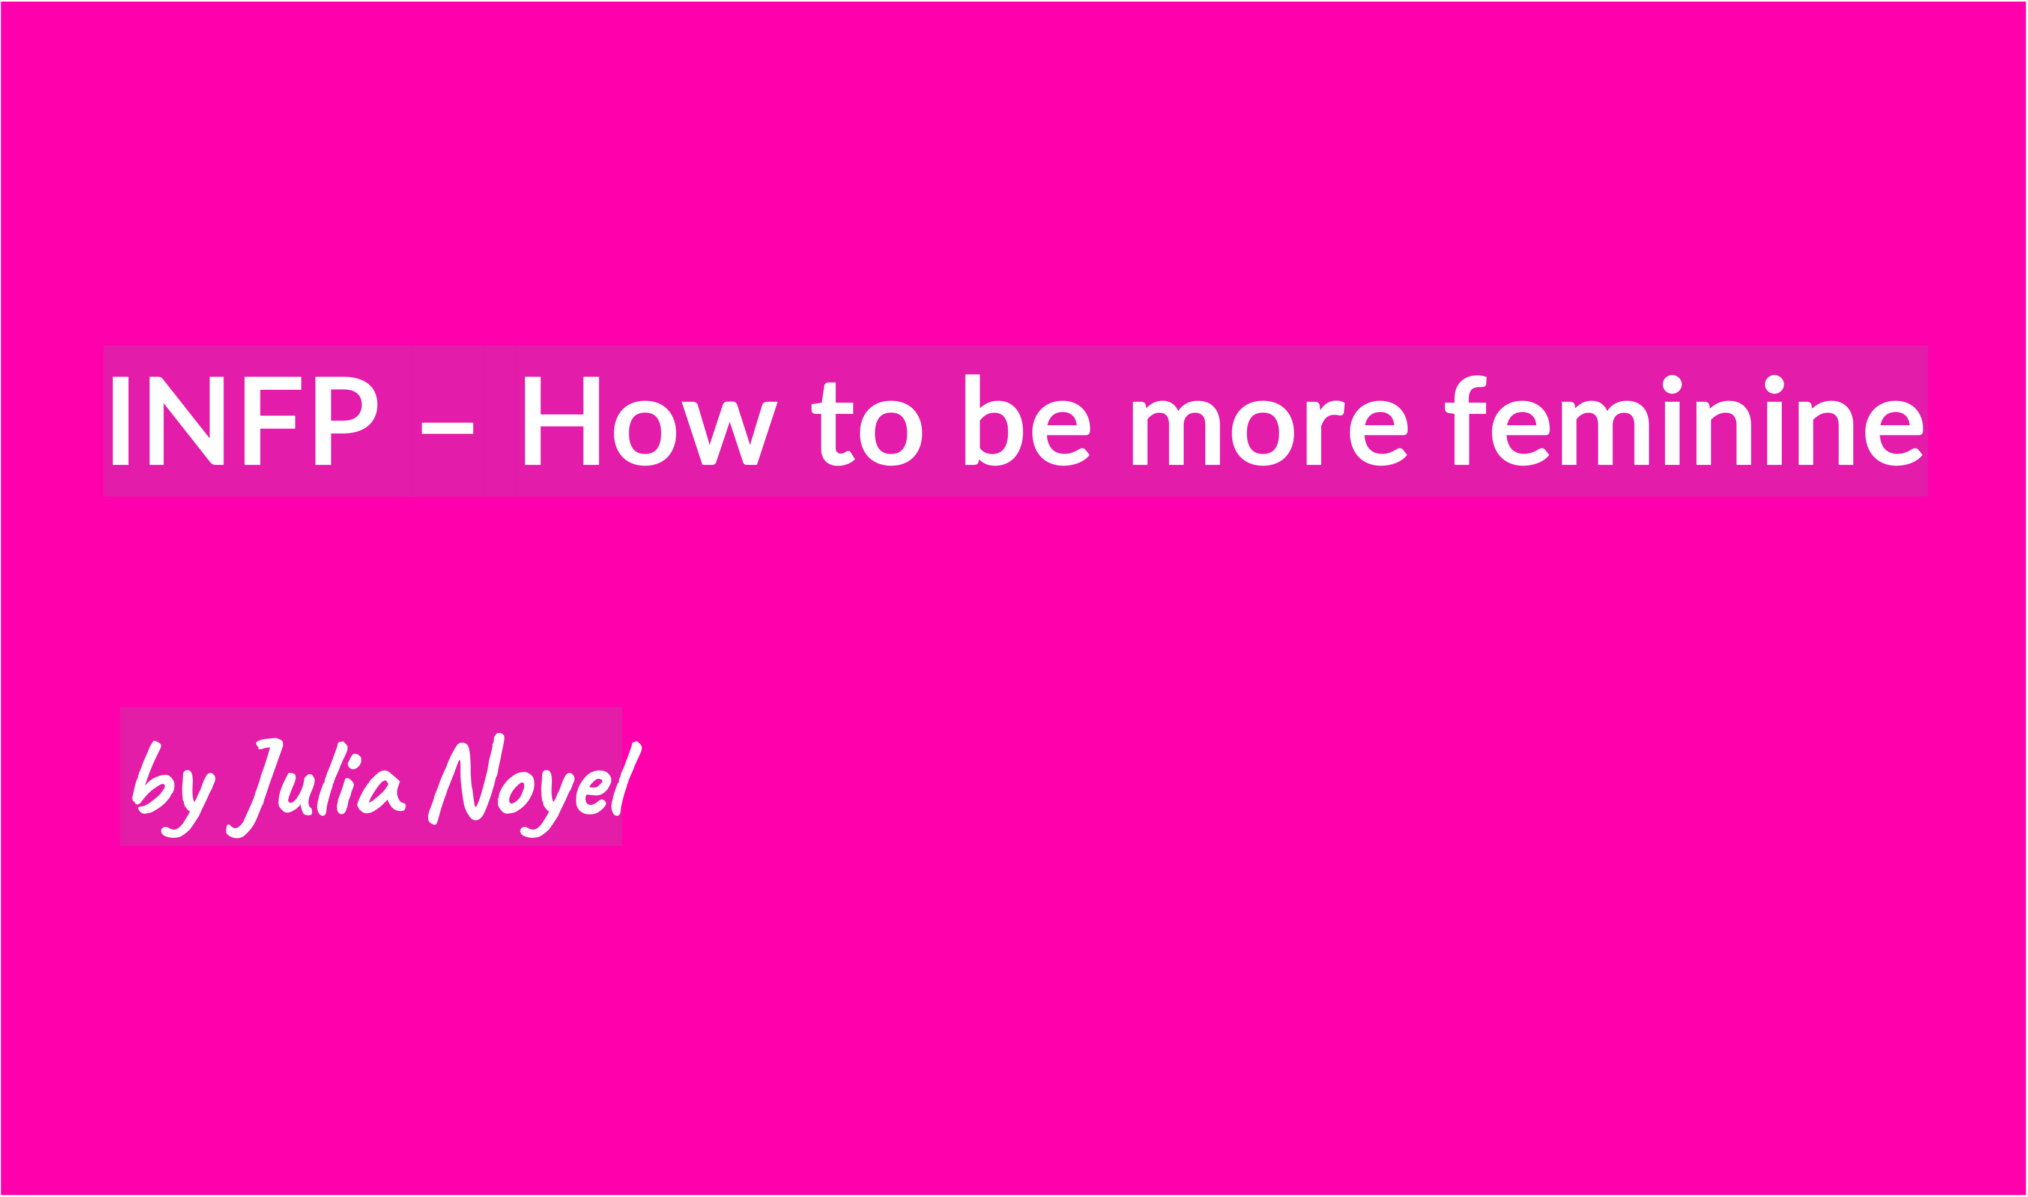 INFP – How to be more feminine by Julia Noyel